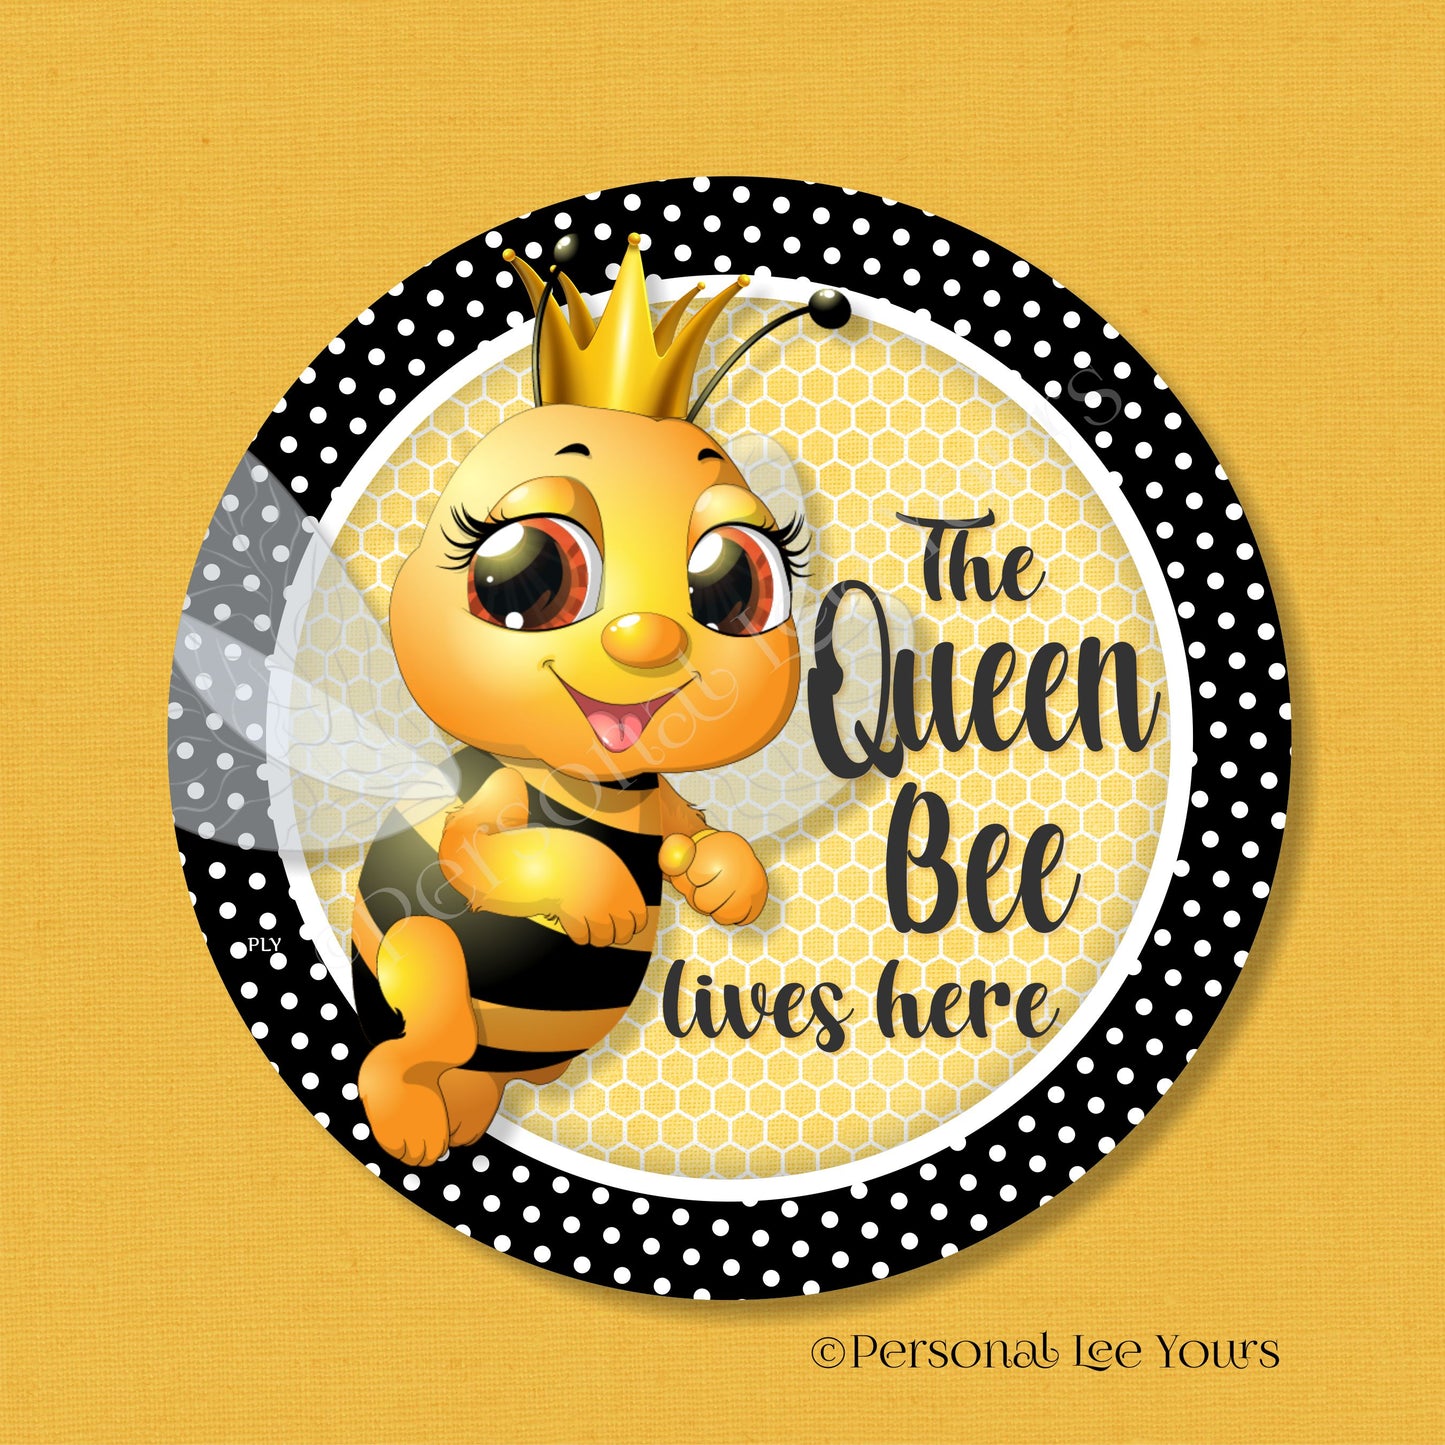 Wreath Sign * The Queen Bee Lives Here ~ Mother's Day * Polka Dot Trim *  Round * Lightweight Metal